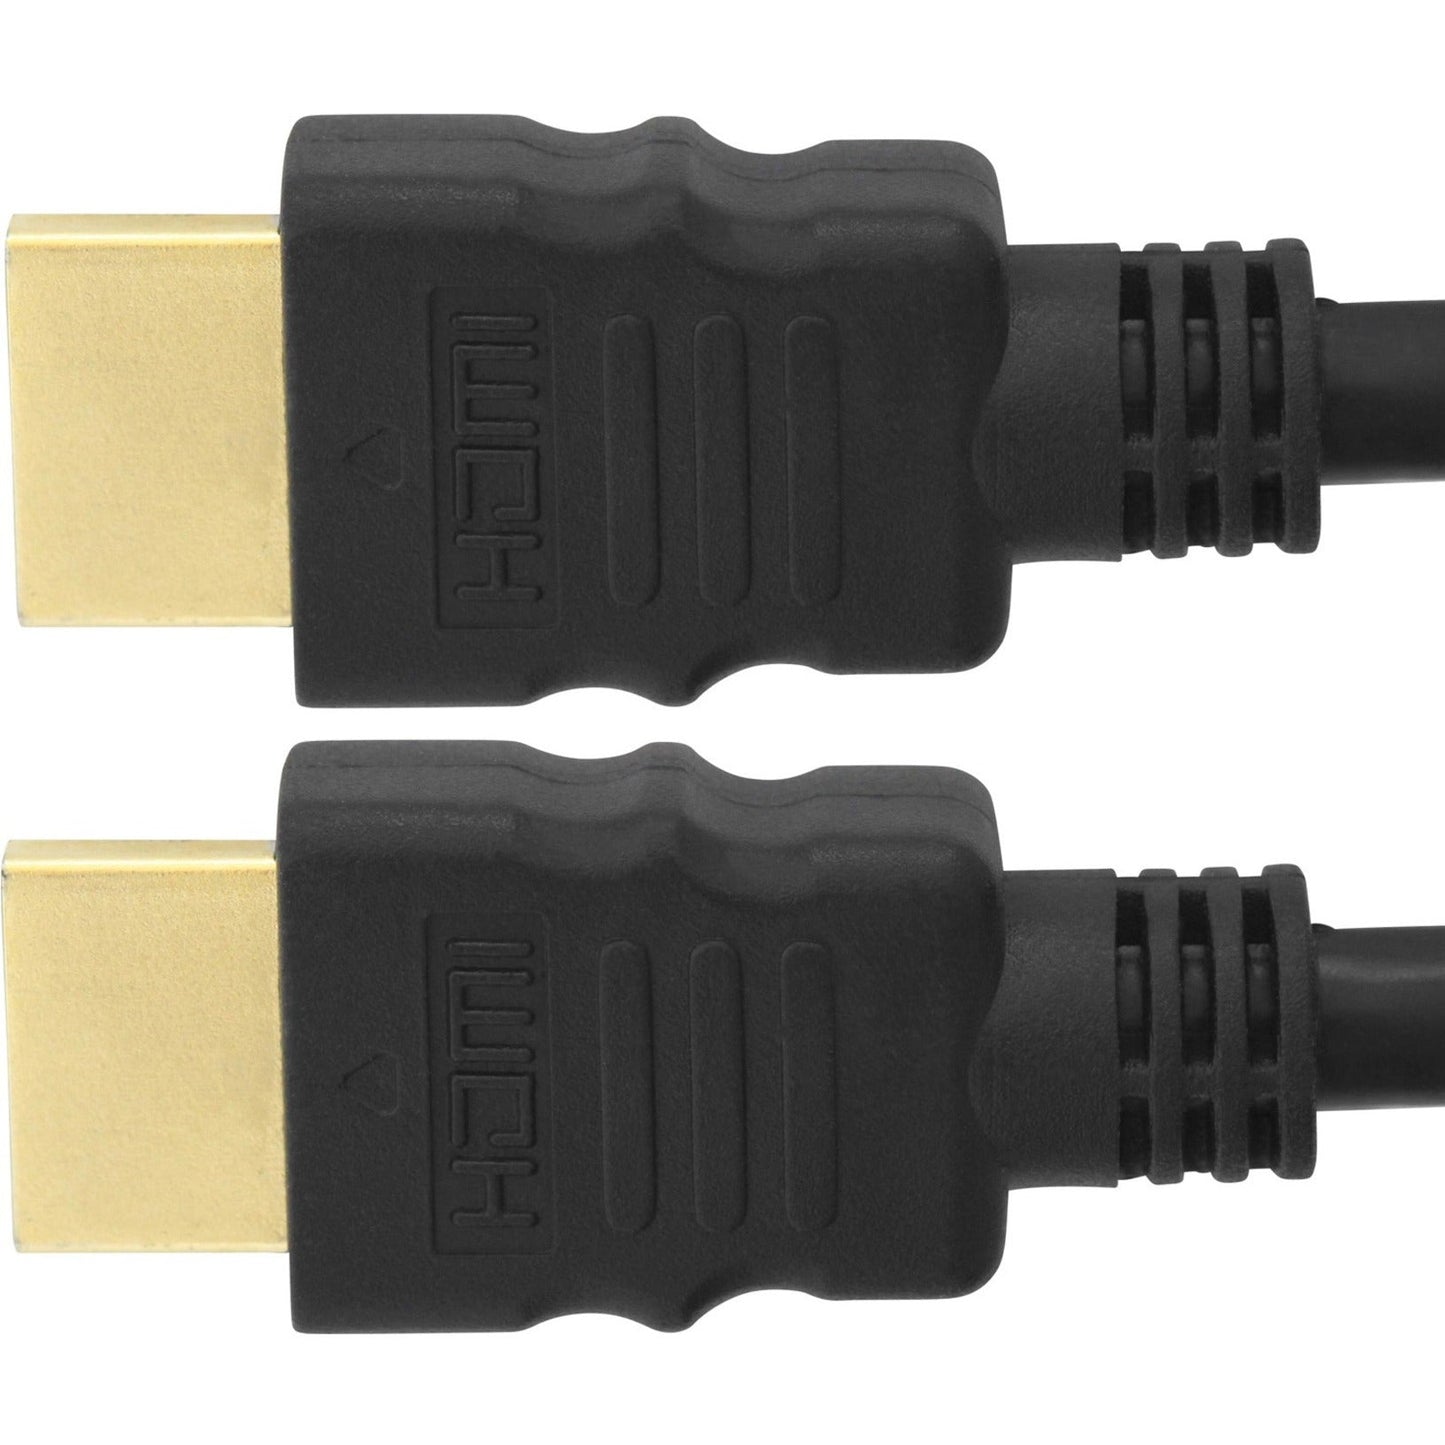 4XEM 25FT 8M High Speed HDMI cable fully supporting 1080p 3D Ethernet and Audio return channel